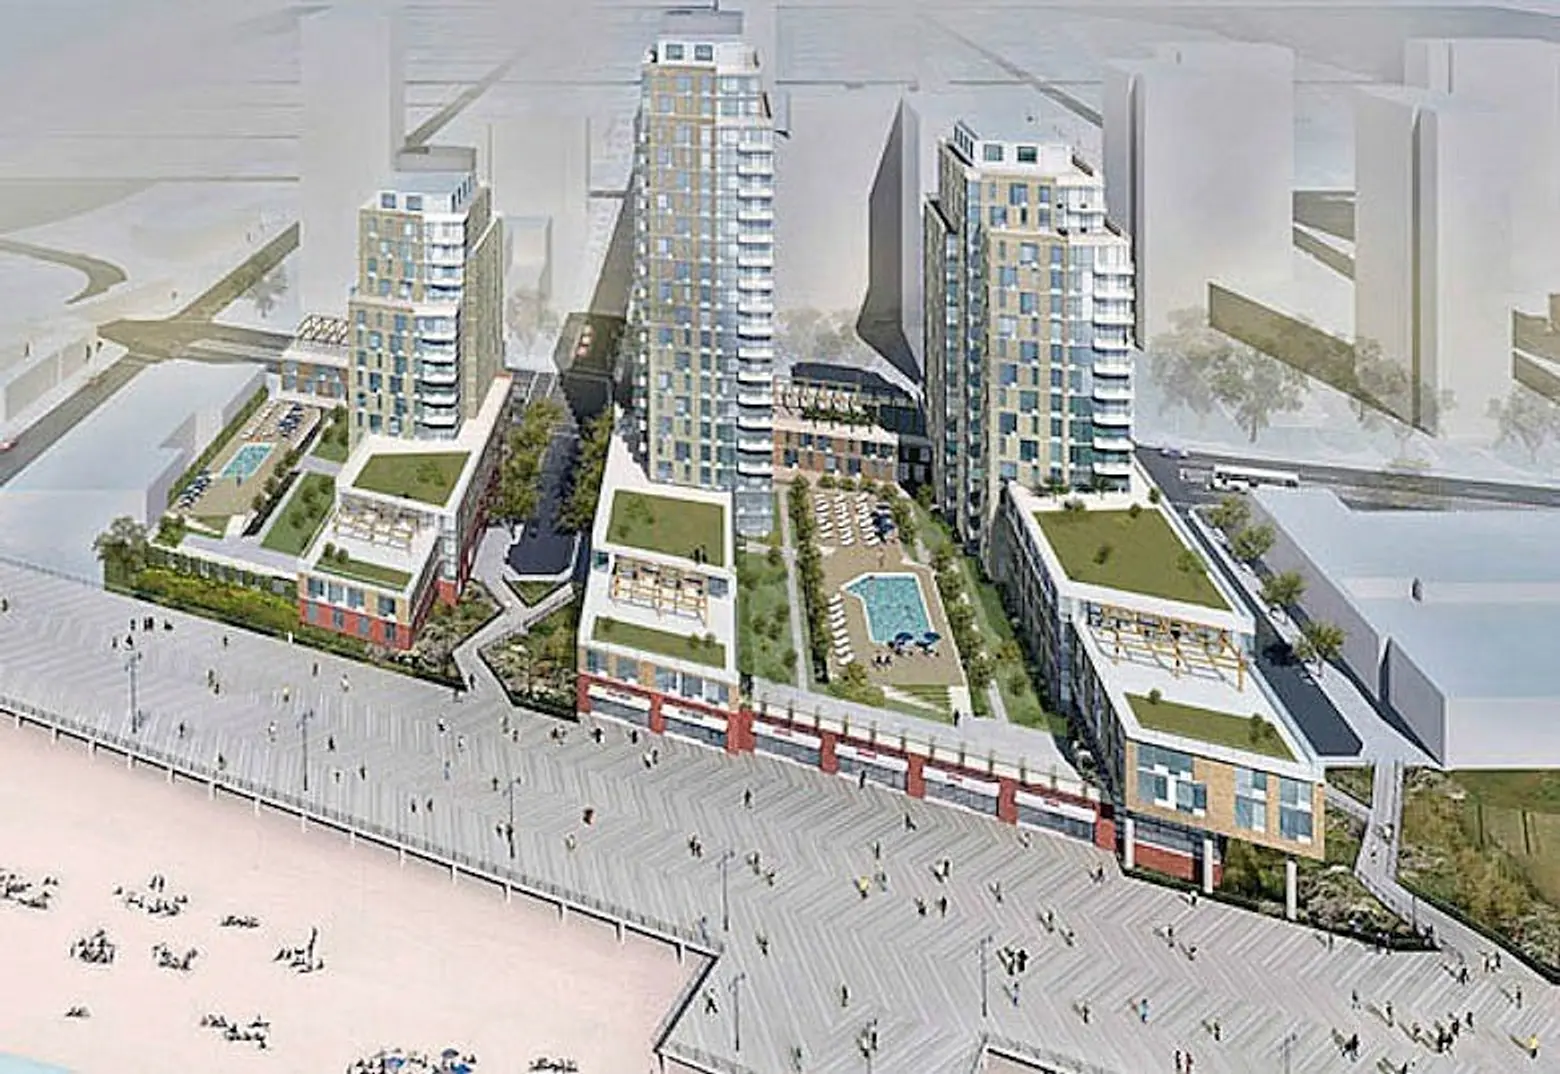 Plans filed for a 21-story Coney Island ‘Dreams’ project on the boardwalk